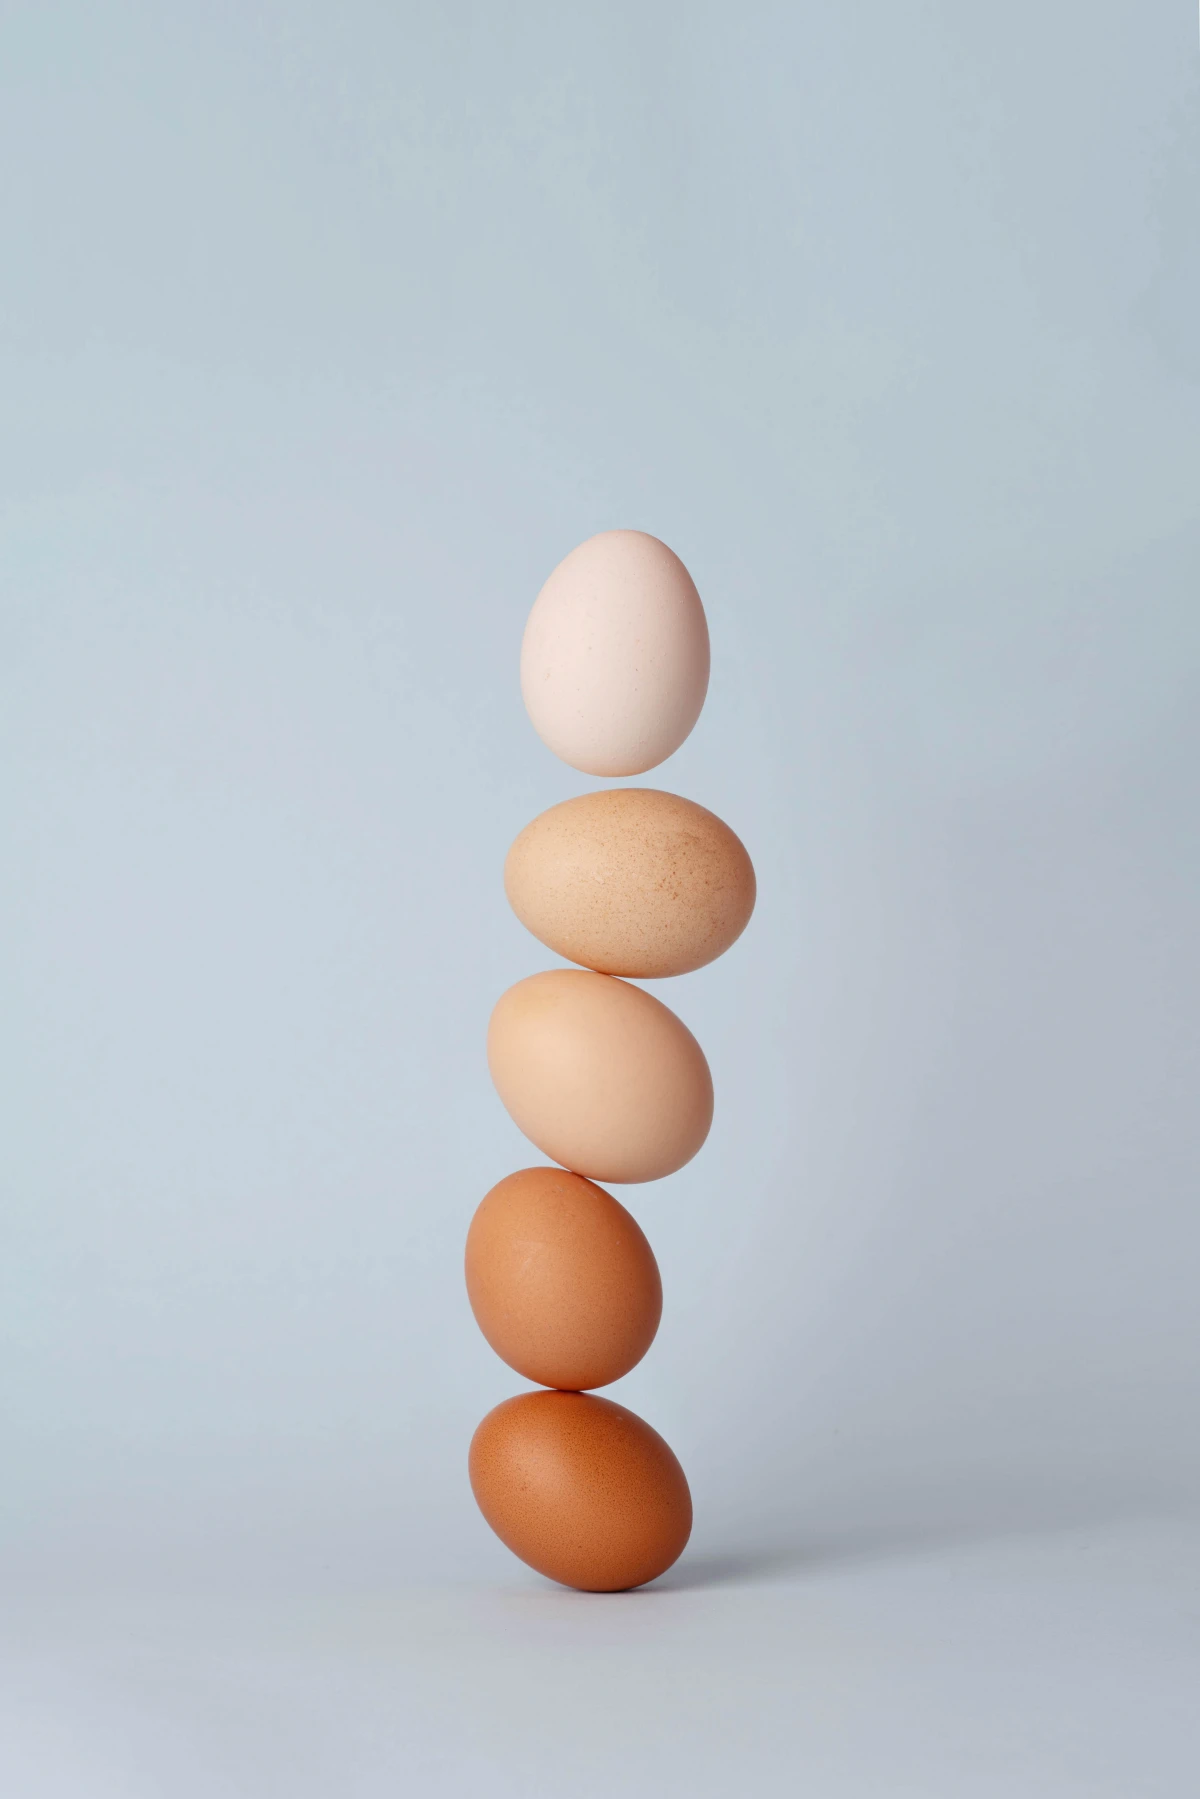 eggs on top of one another